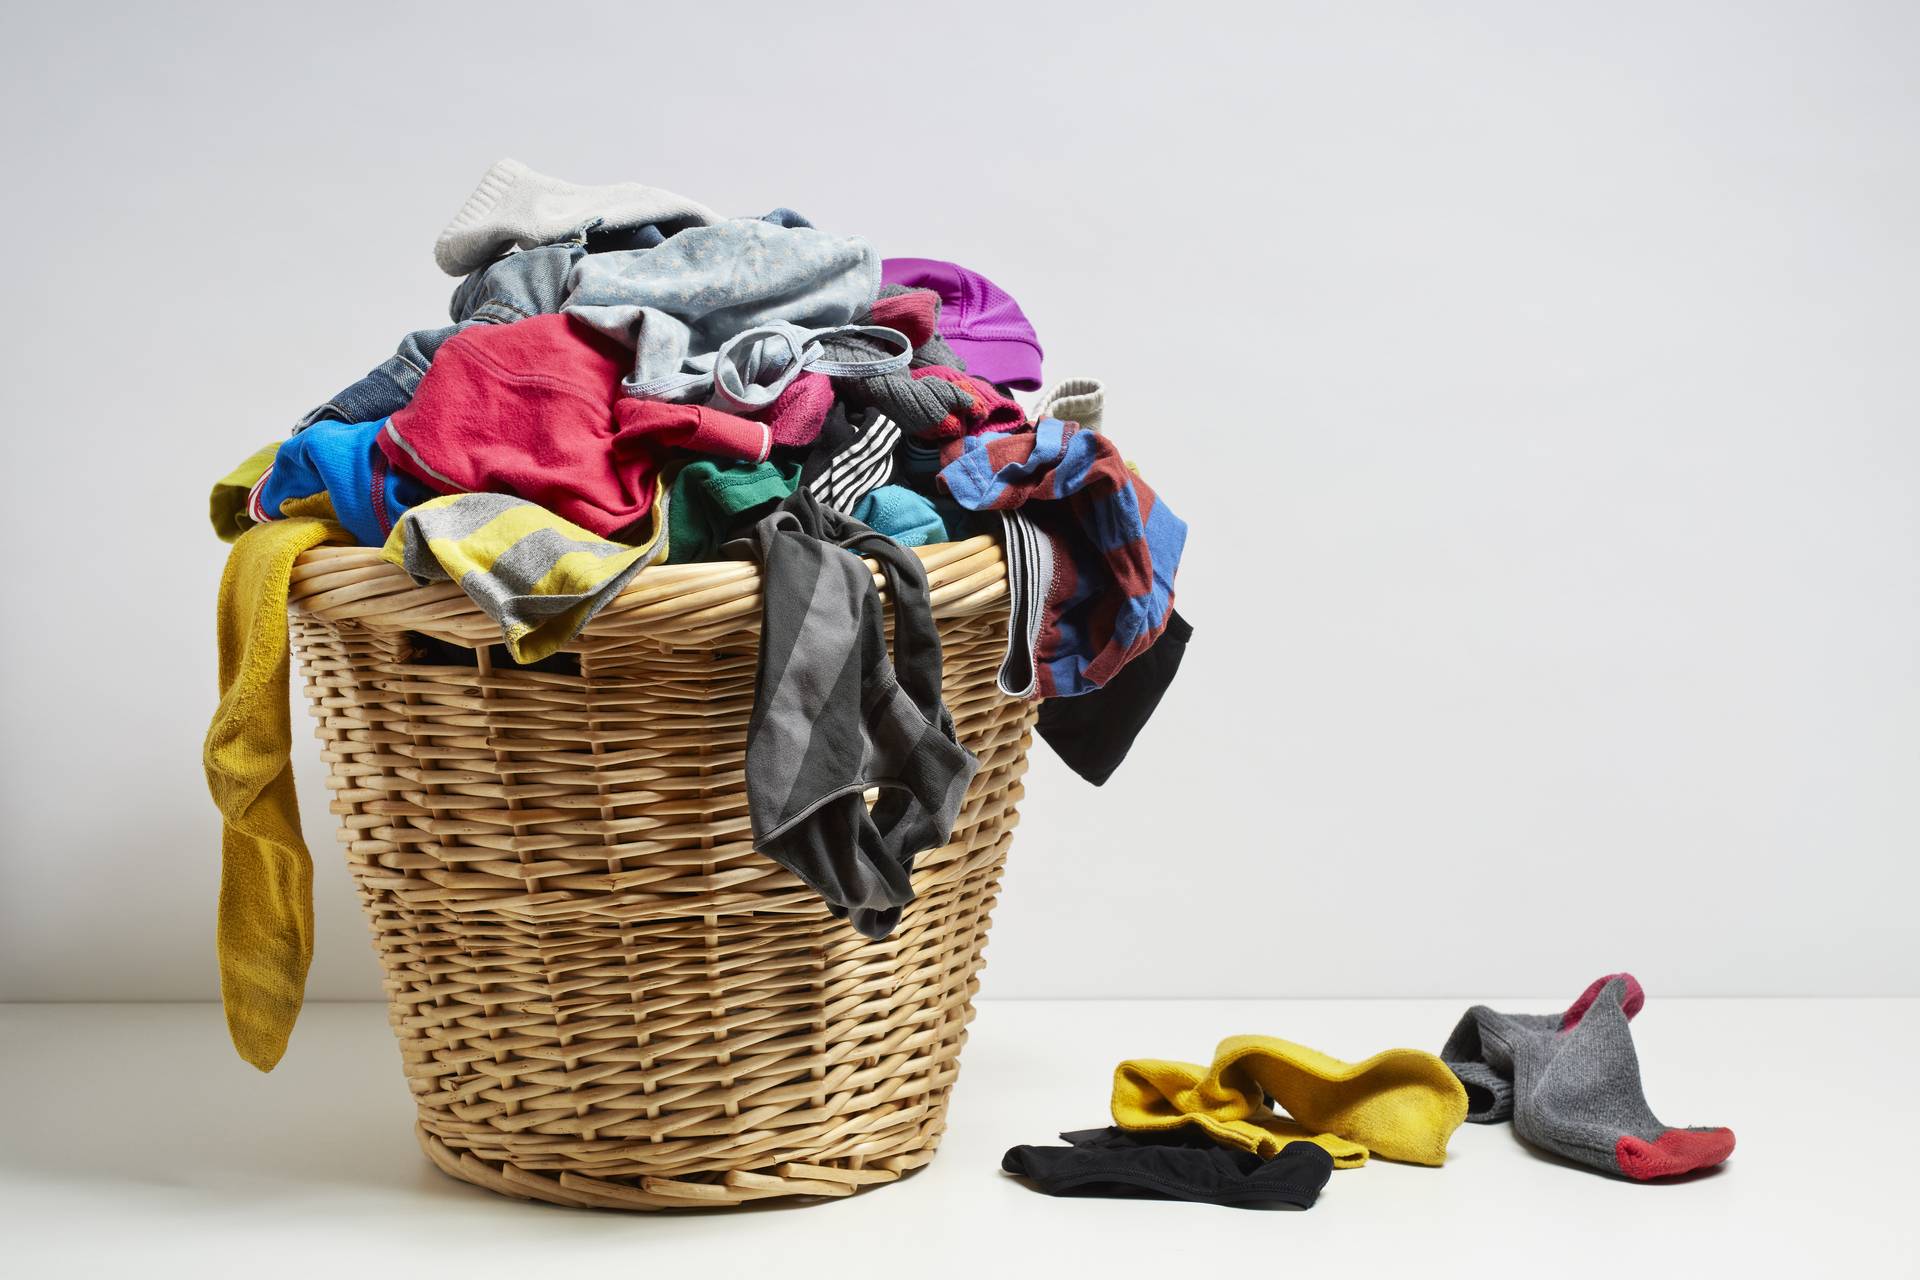 Using laundry baskets or bags for sorting